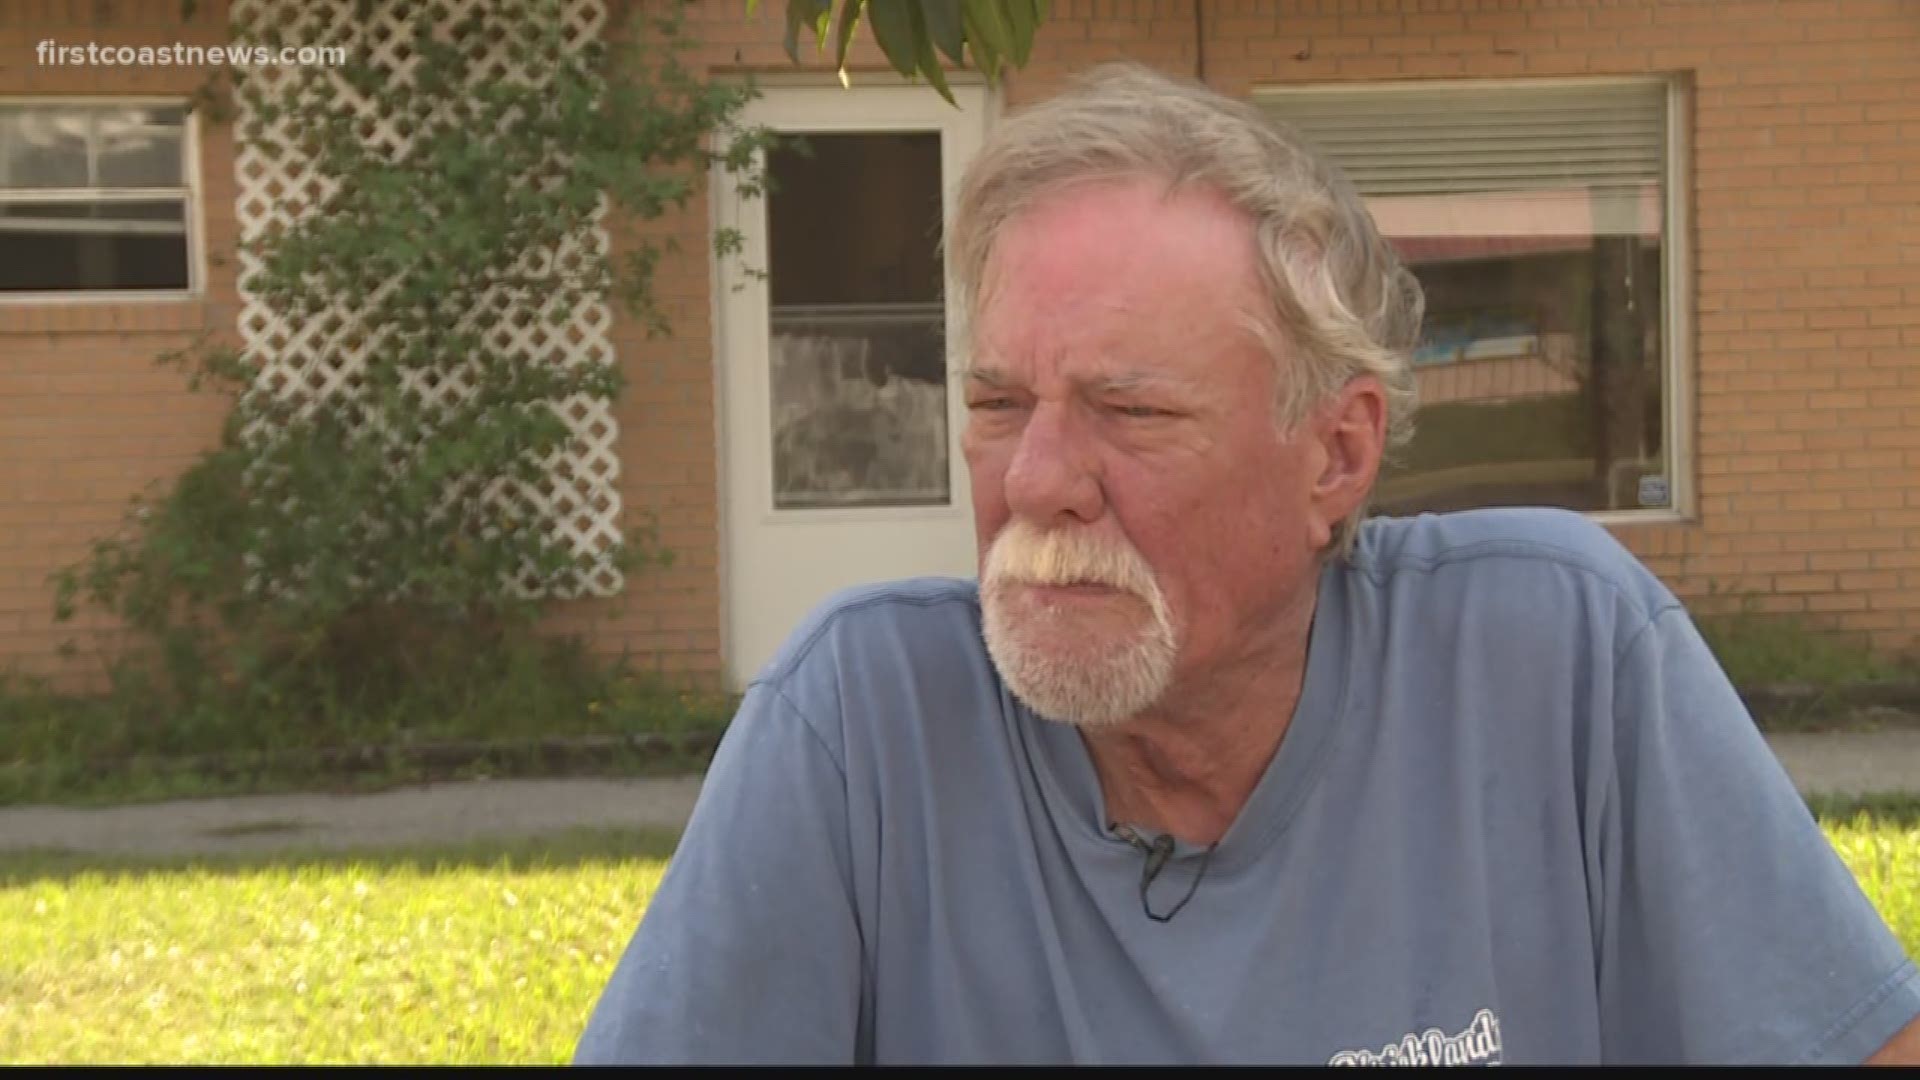 A veteran told FCN he has been living with intense pain for nearly three months after it was determined that he needs surgery.